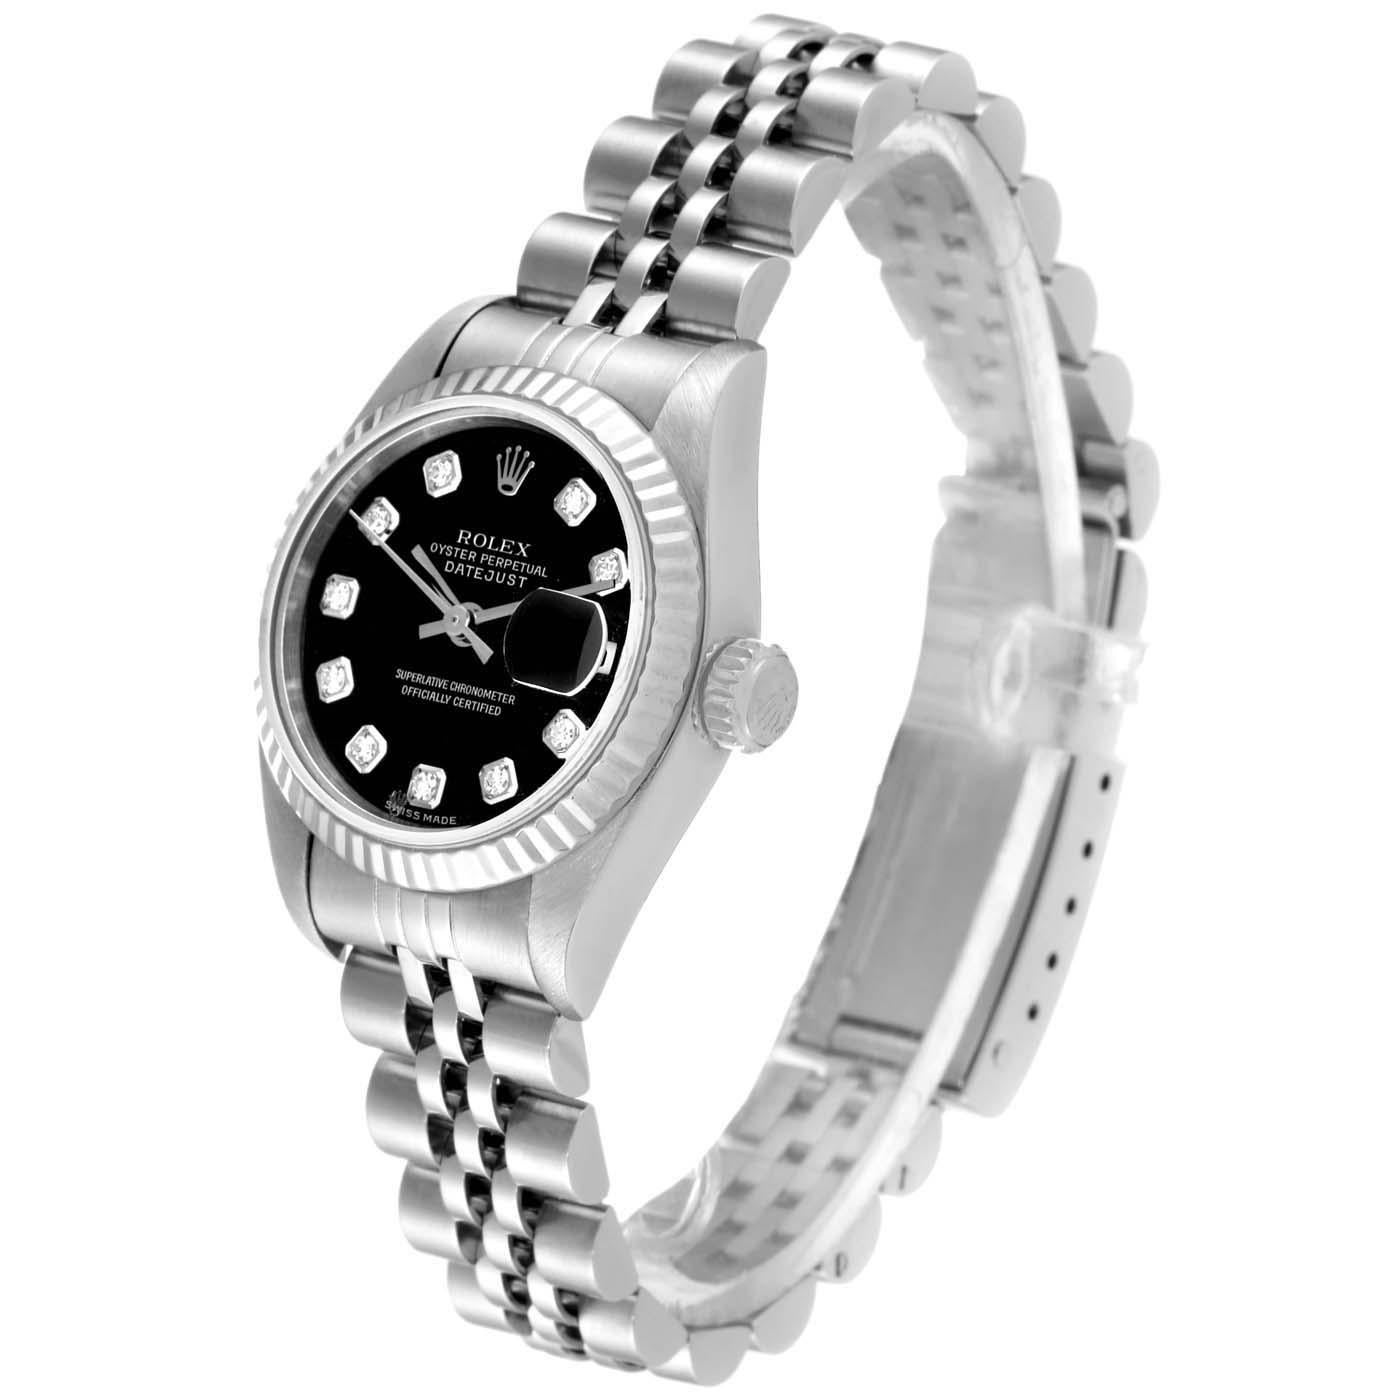 Rolex Datejust 26mm Steel White Gold Black Diamond Dial Ladies Watch 79174. Chronometer self-winding movement. Stainless steel oyster case 26.0 mm in diameter. Rolex logo on a crown. 18K white gold fluted bezel. Scratch-resistant sapphire crystal